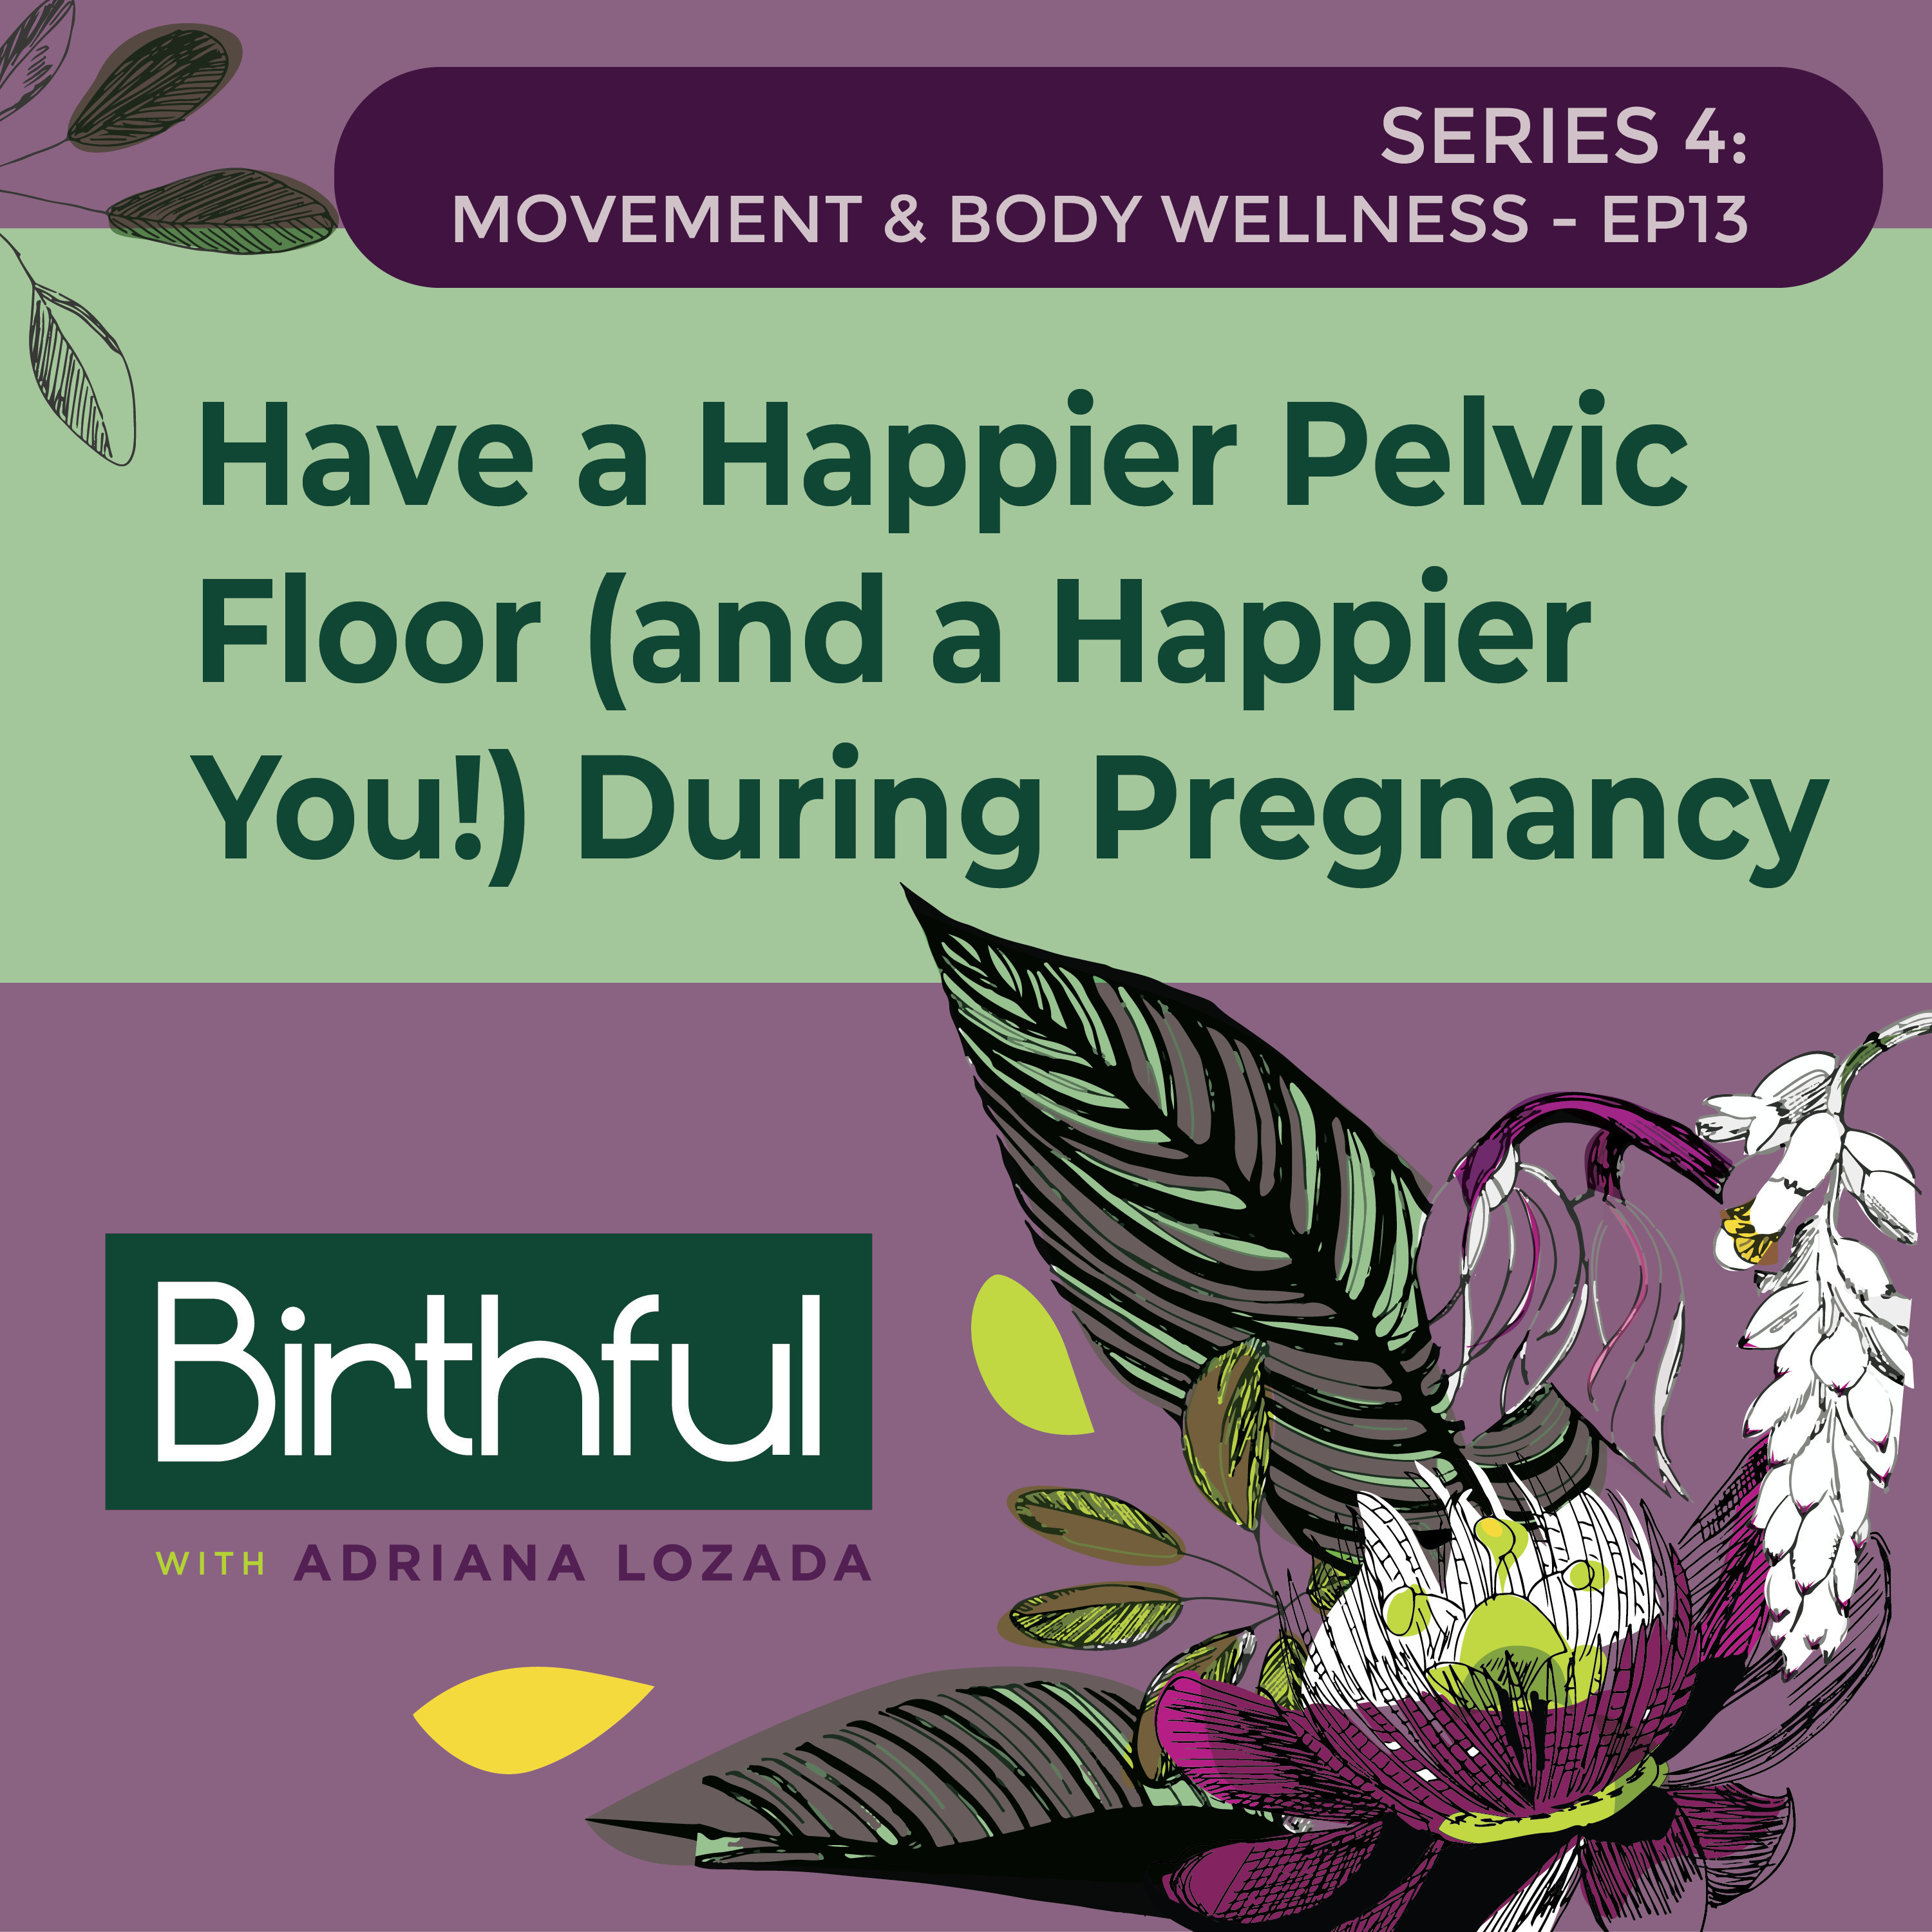 Have a Happier Pelvic Floor (and a Happier You!) During Pregnancy